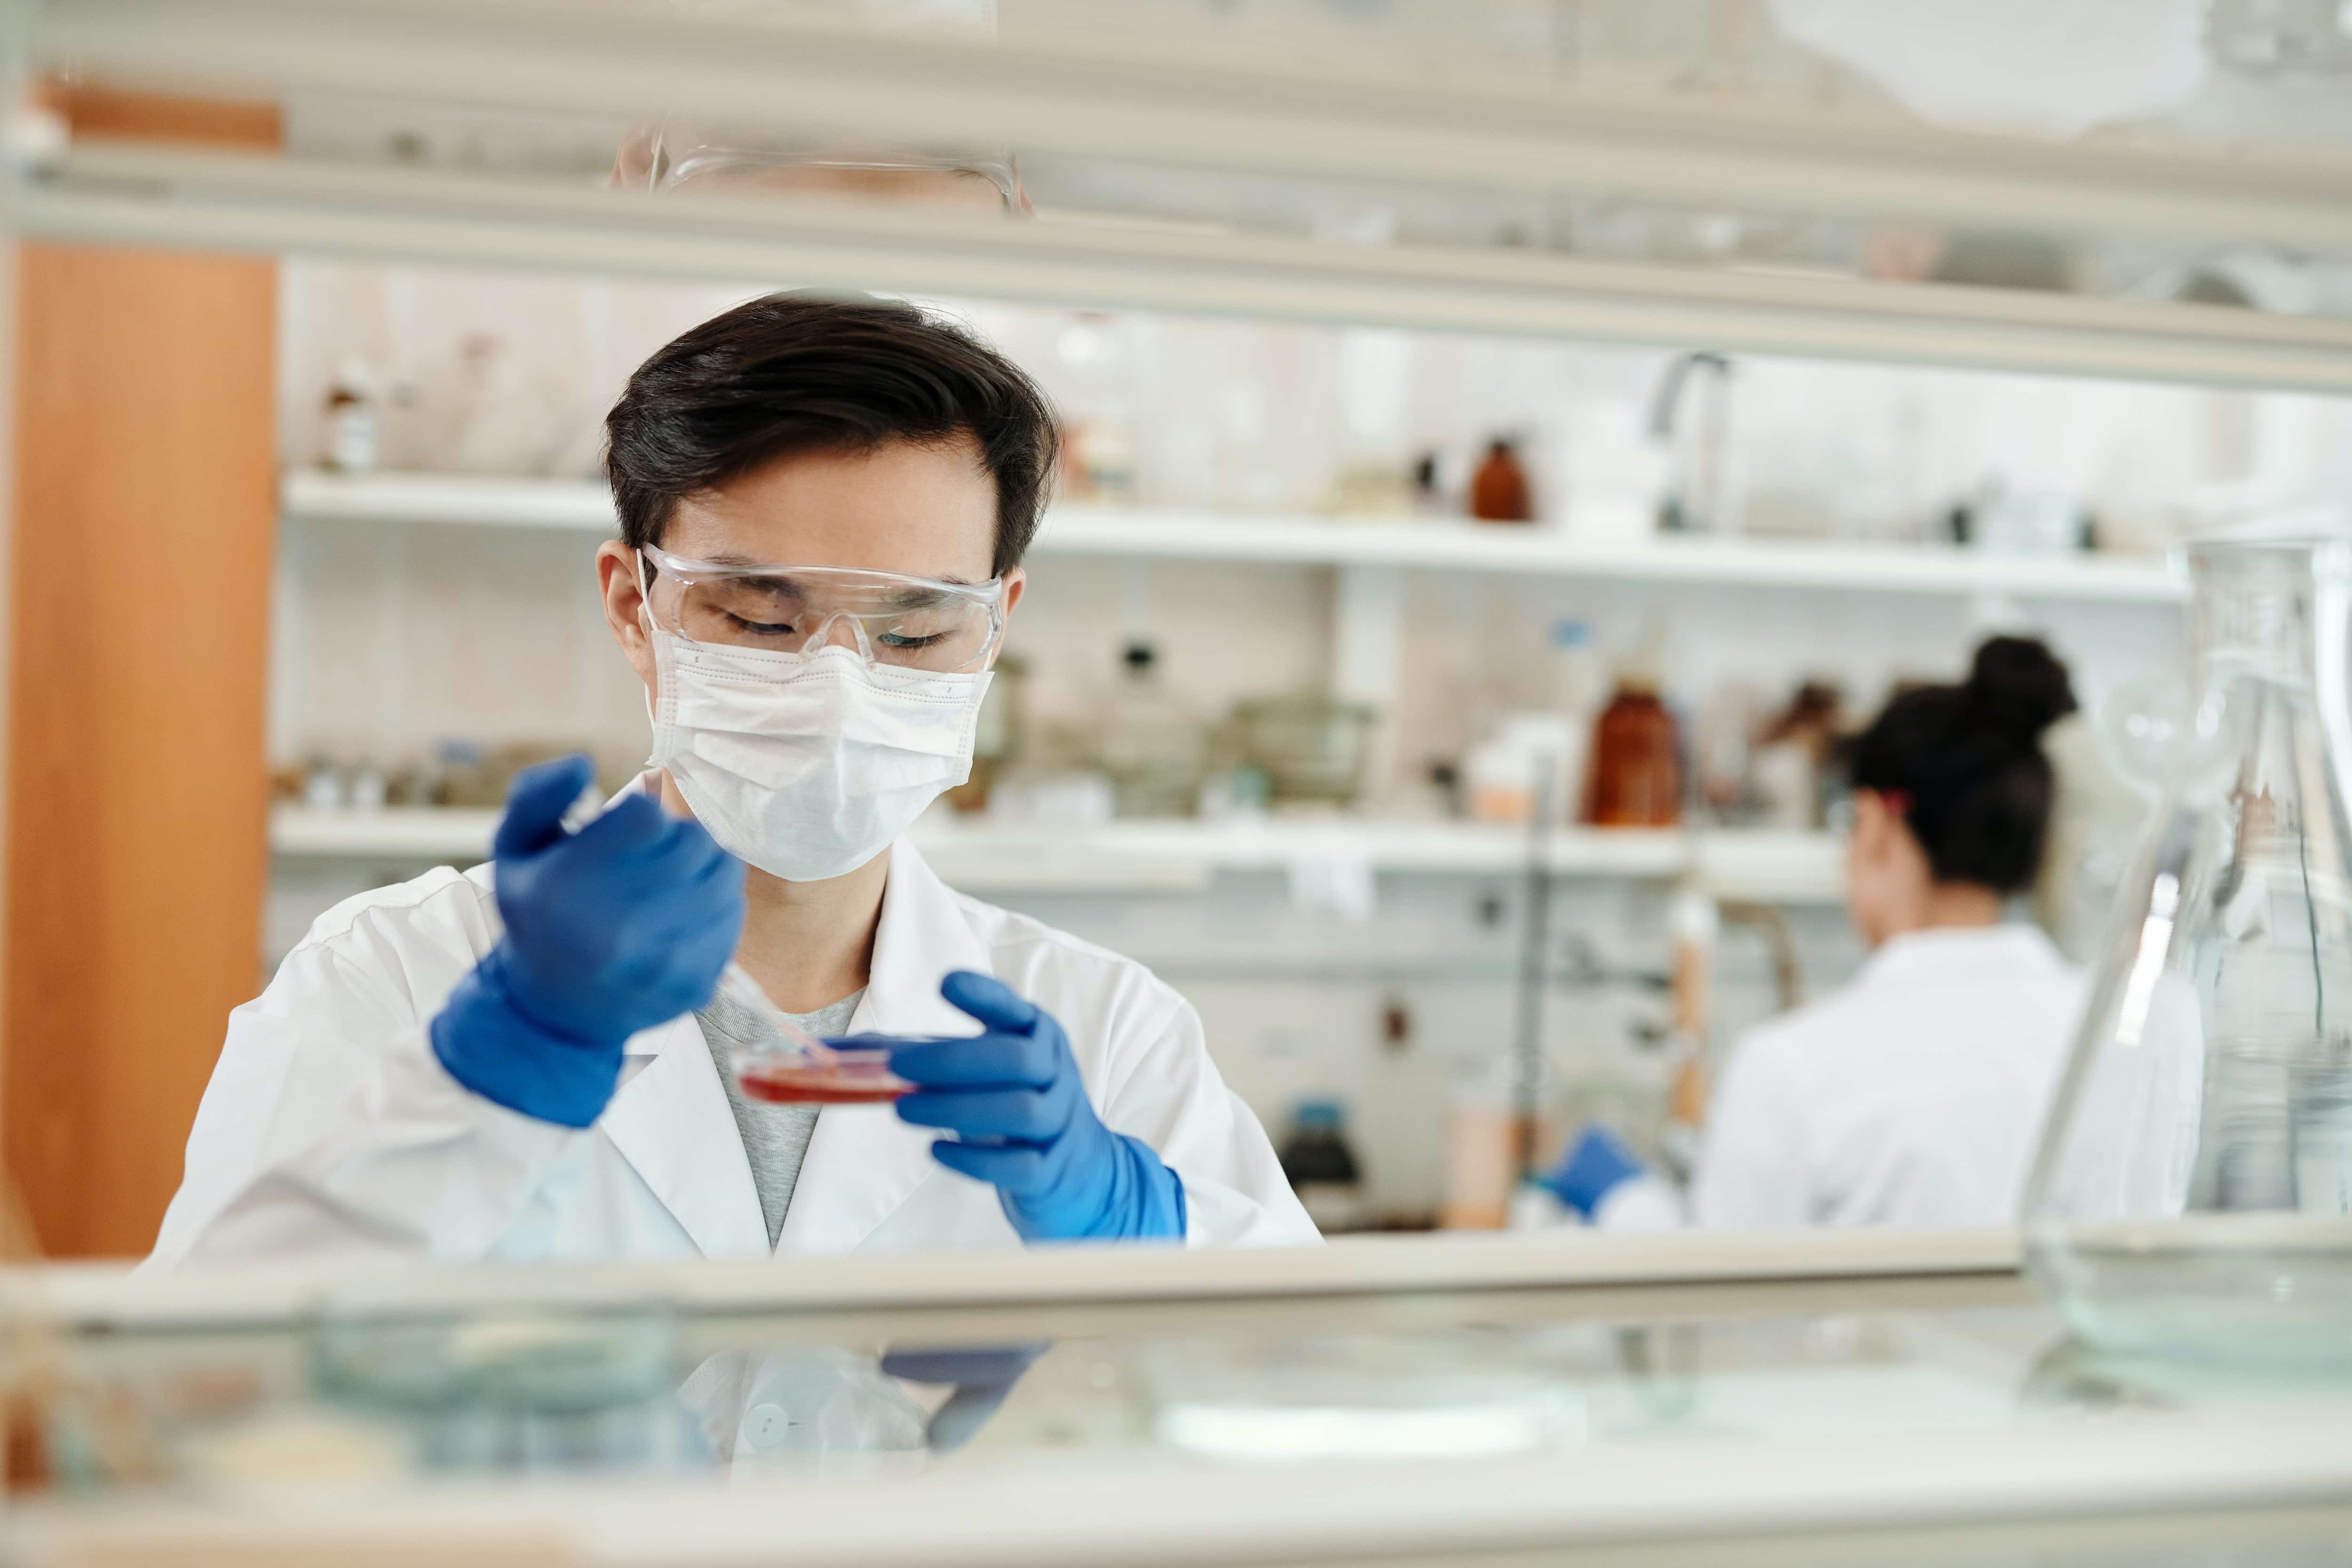 Grants of between £50-£100 are available to assist students with extra-curricular molecular biosciences based projects that enable them to develop skills and boost their CV.